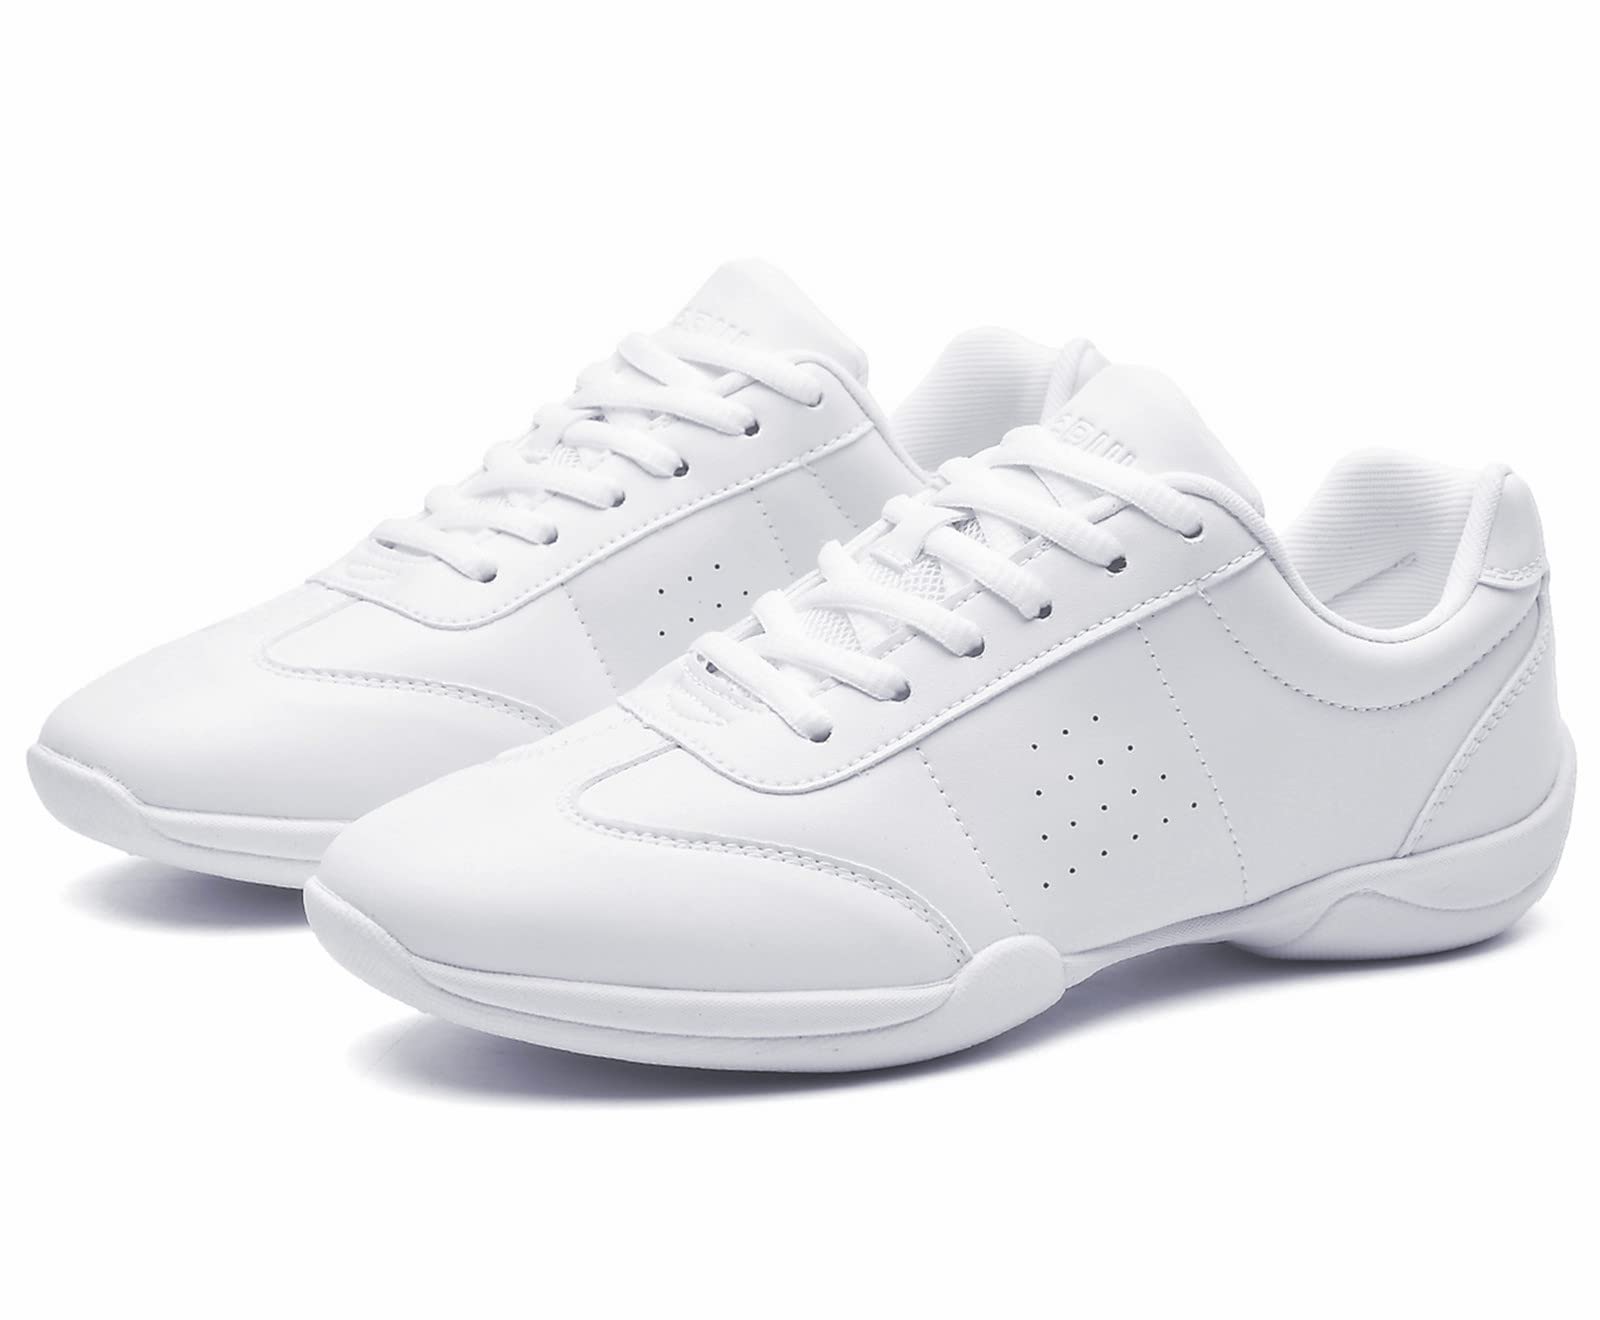 kkdom Adult & Youth White Cheerleading Shoe Athletic Dance Shoes Tennis Sneakers Sport Training Cheer Shoes White US Size 4.5/EU Size 35